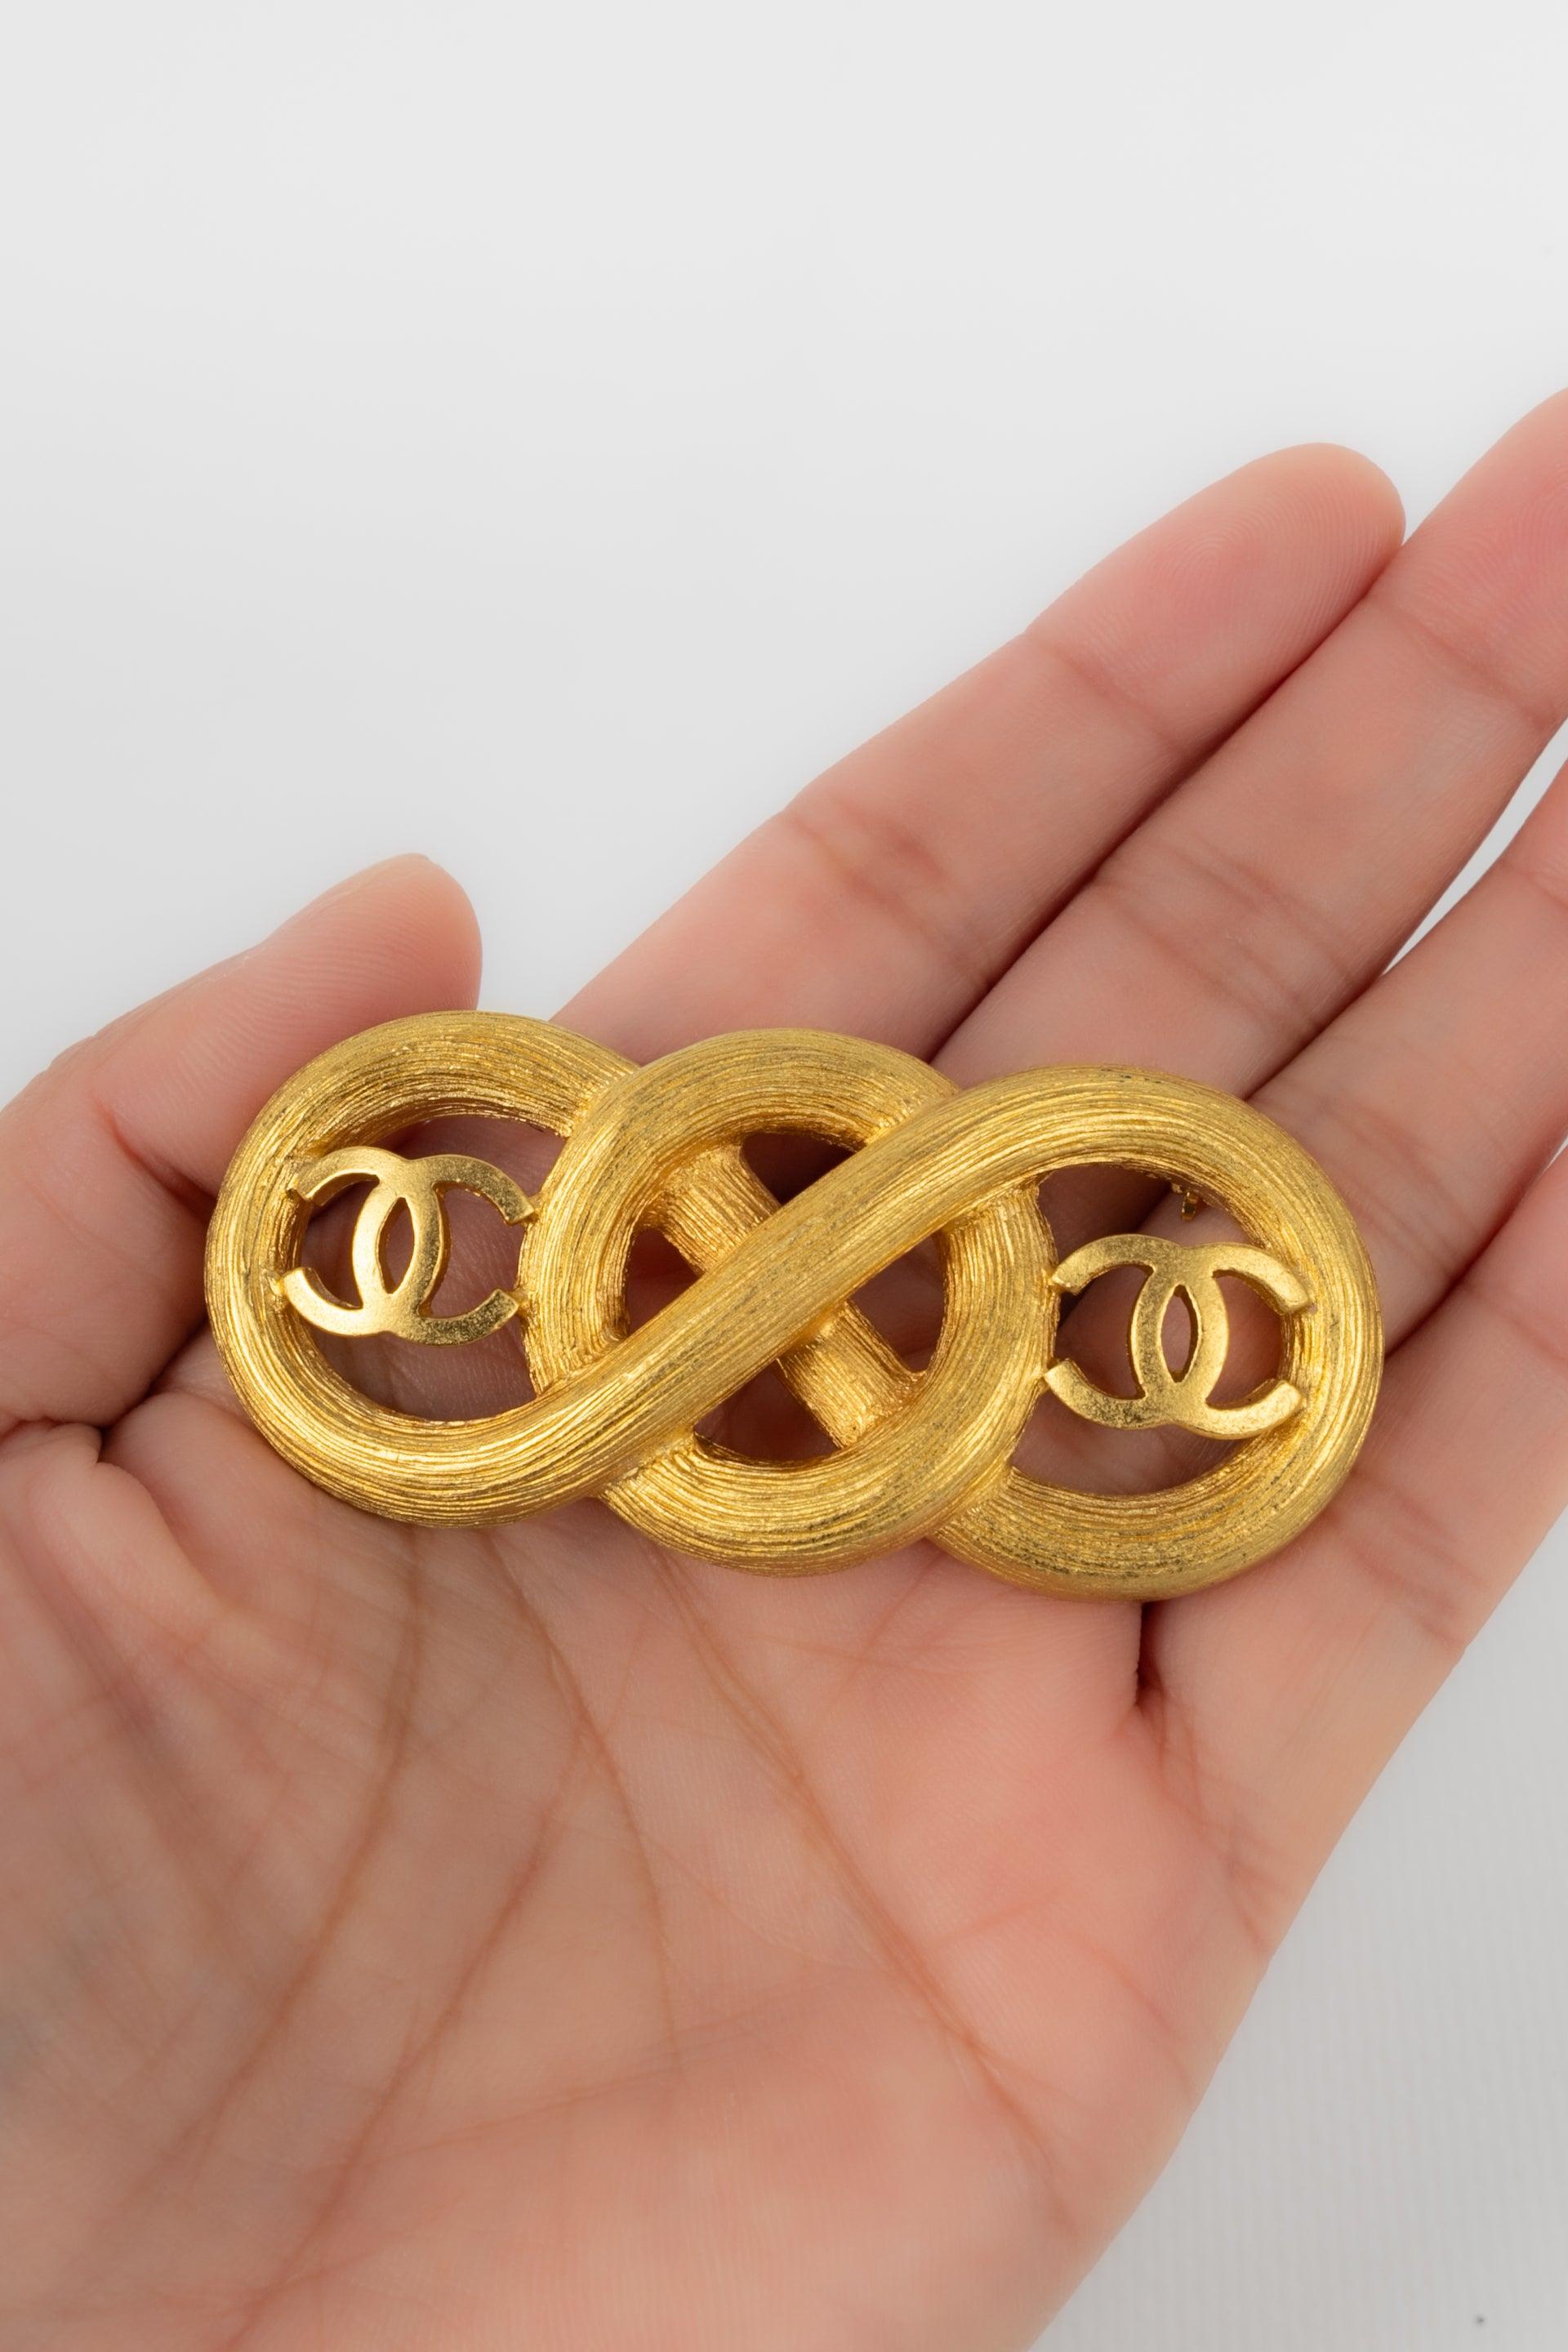 Chanel - (Made in France) Golden metal brooch. 1995 Cruise Collection.

Additional information:
Condition: Very good condition
Dimensions: Length: 6.5 cm

Seller Reference: BRB144